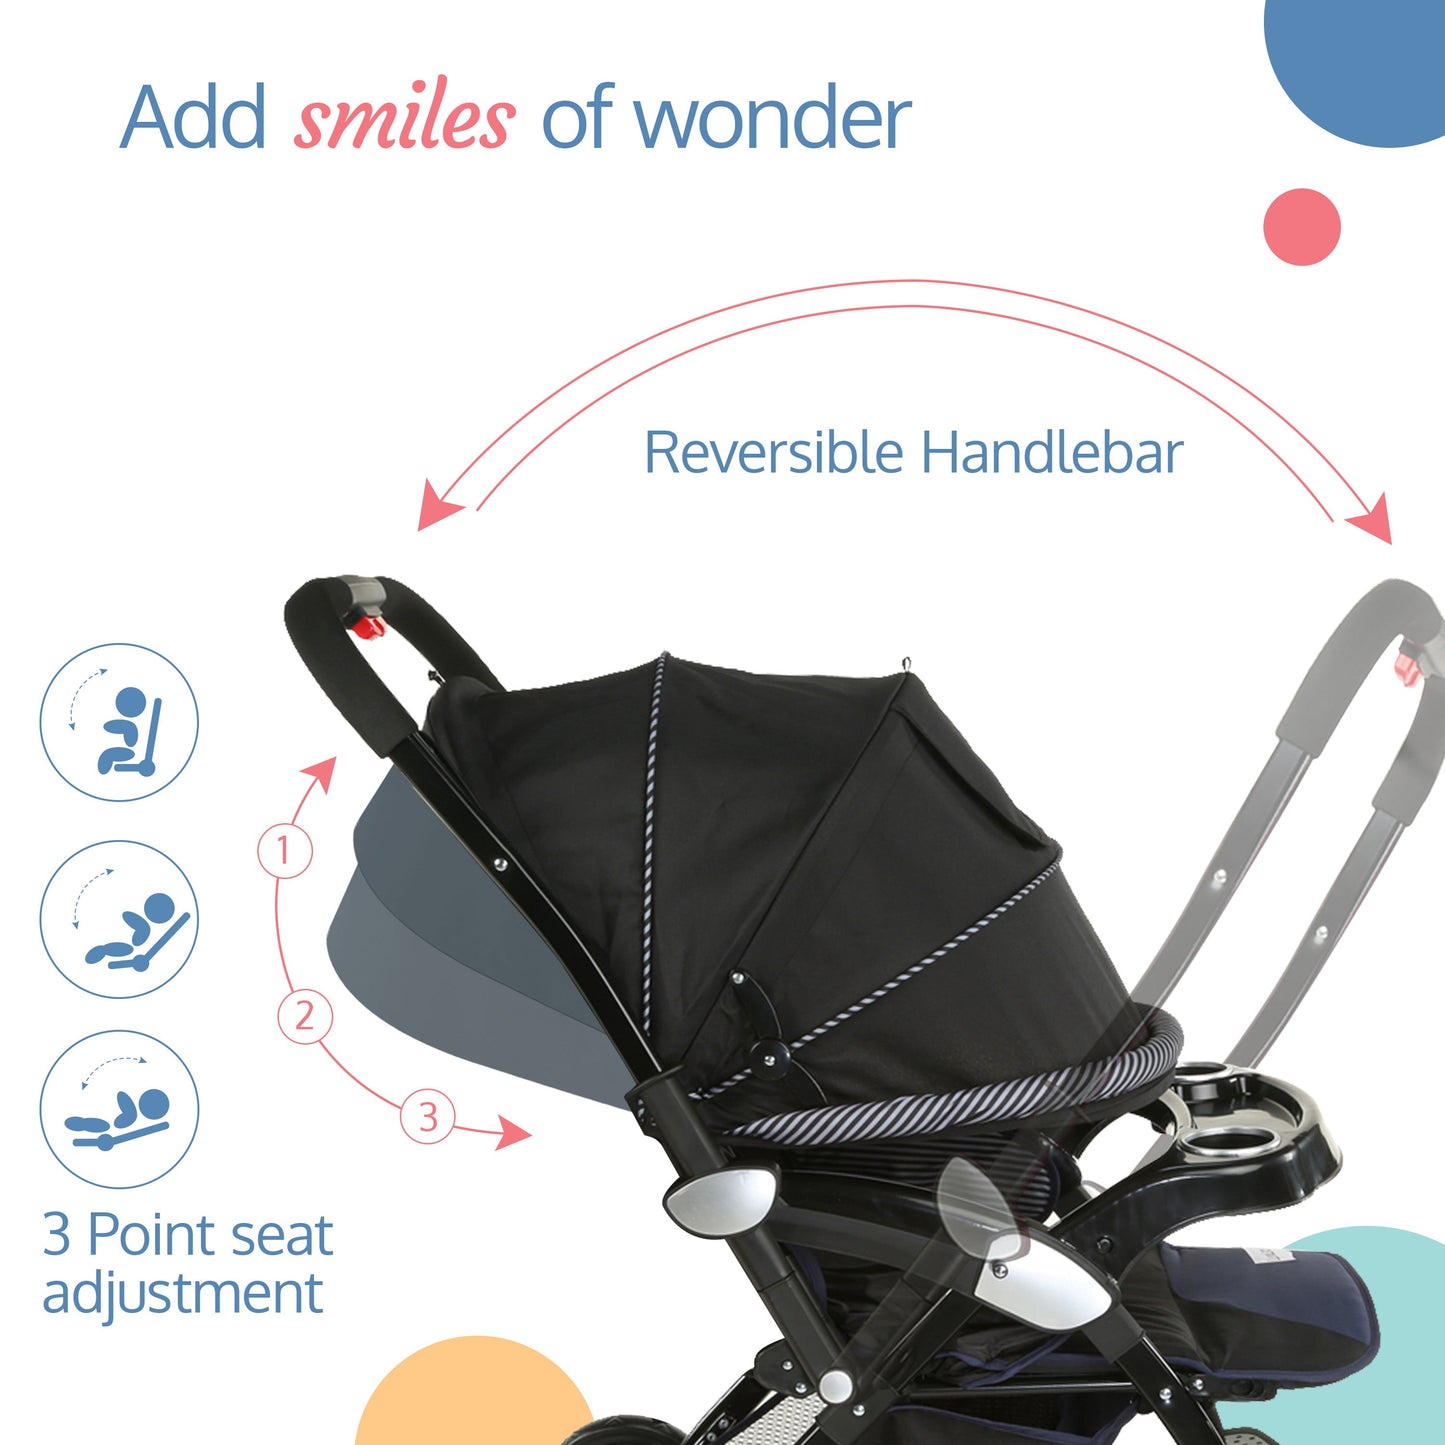 Galaxy baby stroller, Pram for baby with 5 point safety harness, Spacious Cushioned seat with Multi level seat recline, Easy Fold, Lightweight baby stroller for 0 to 3 years (Black)